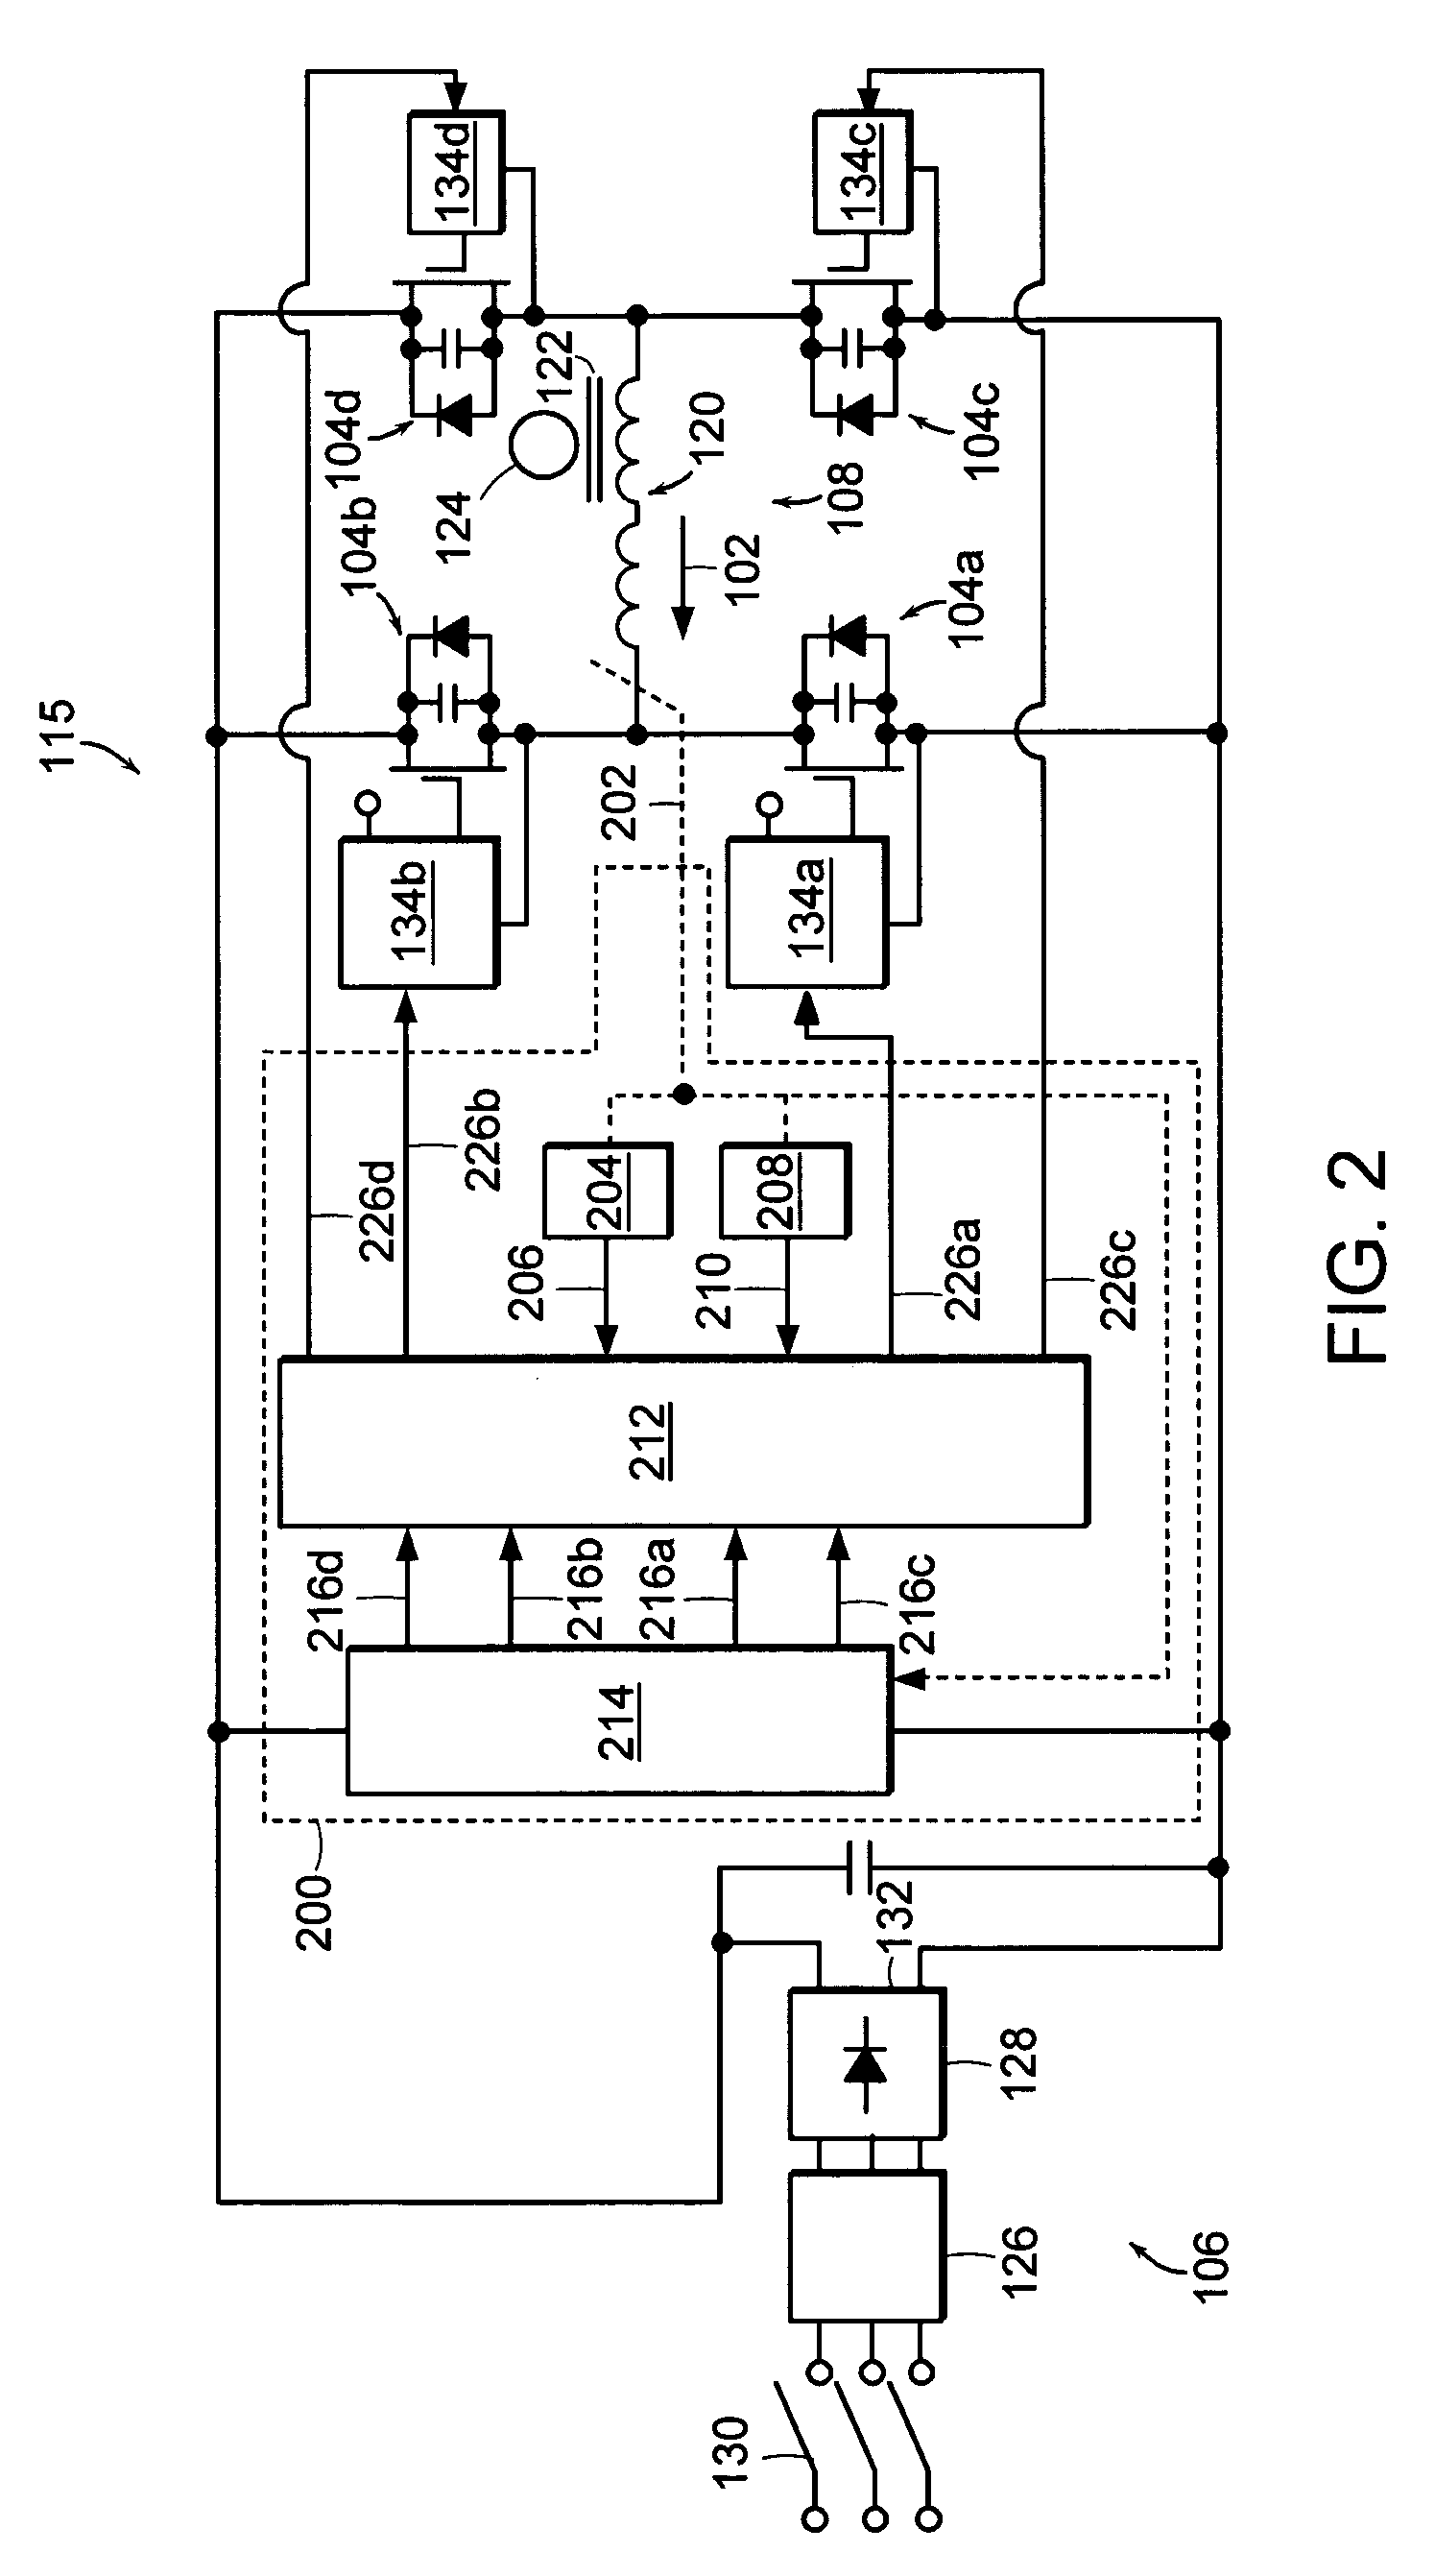 Power supply controller to actively drive a load current when the load current exceeds a set point